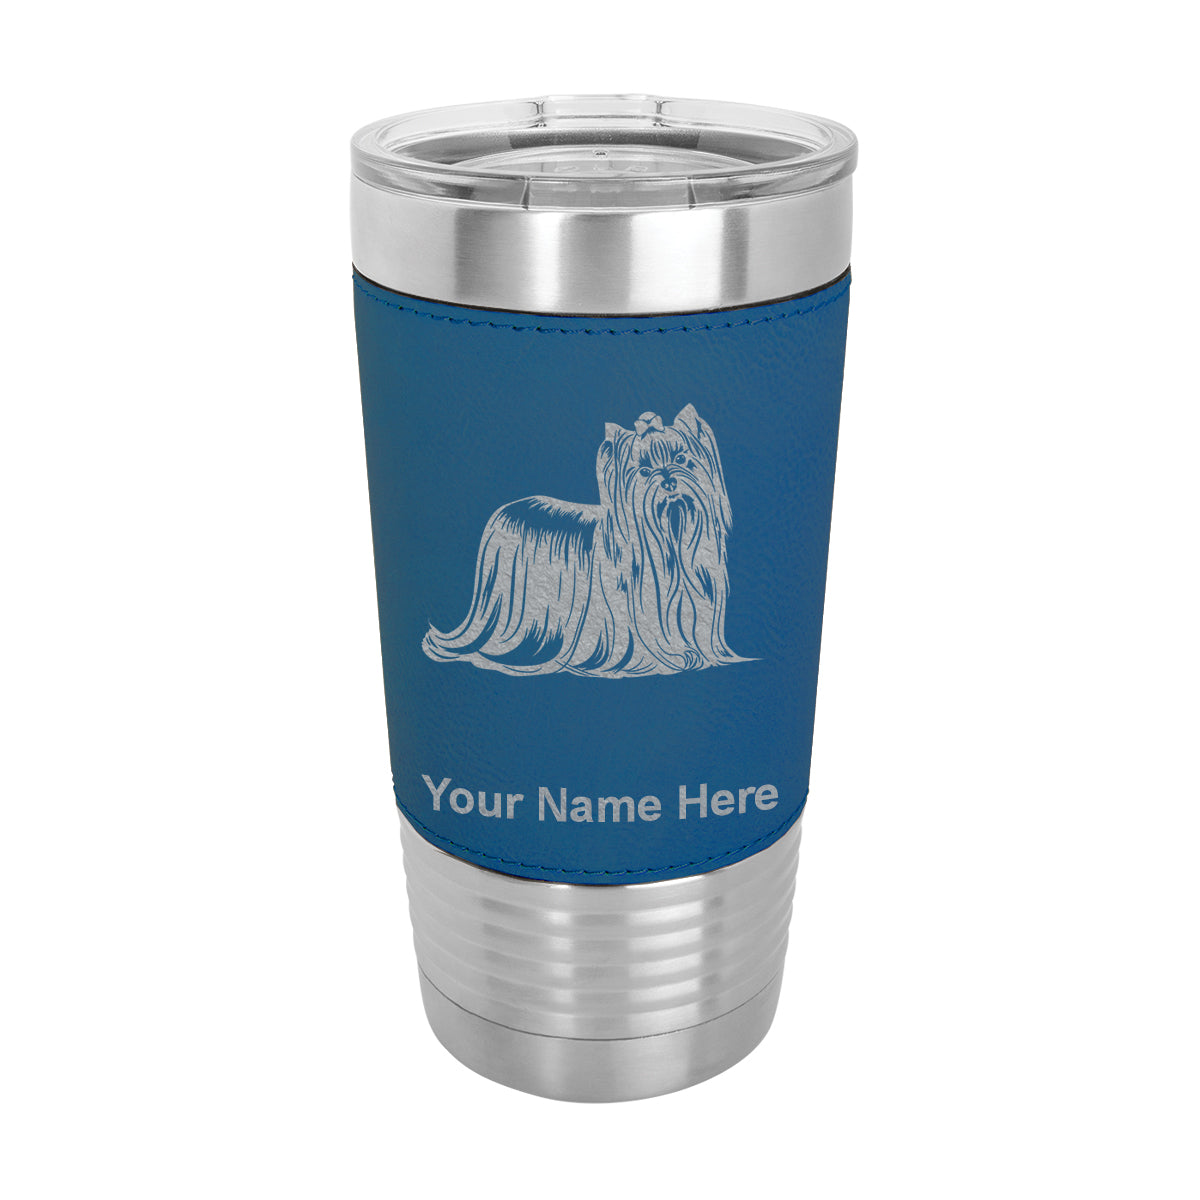 20oz Faux Leather Tumbler Mug, Yorkshire Terrier Dog, Personalized Engraving Included